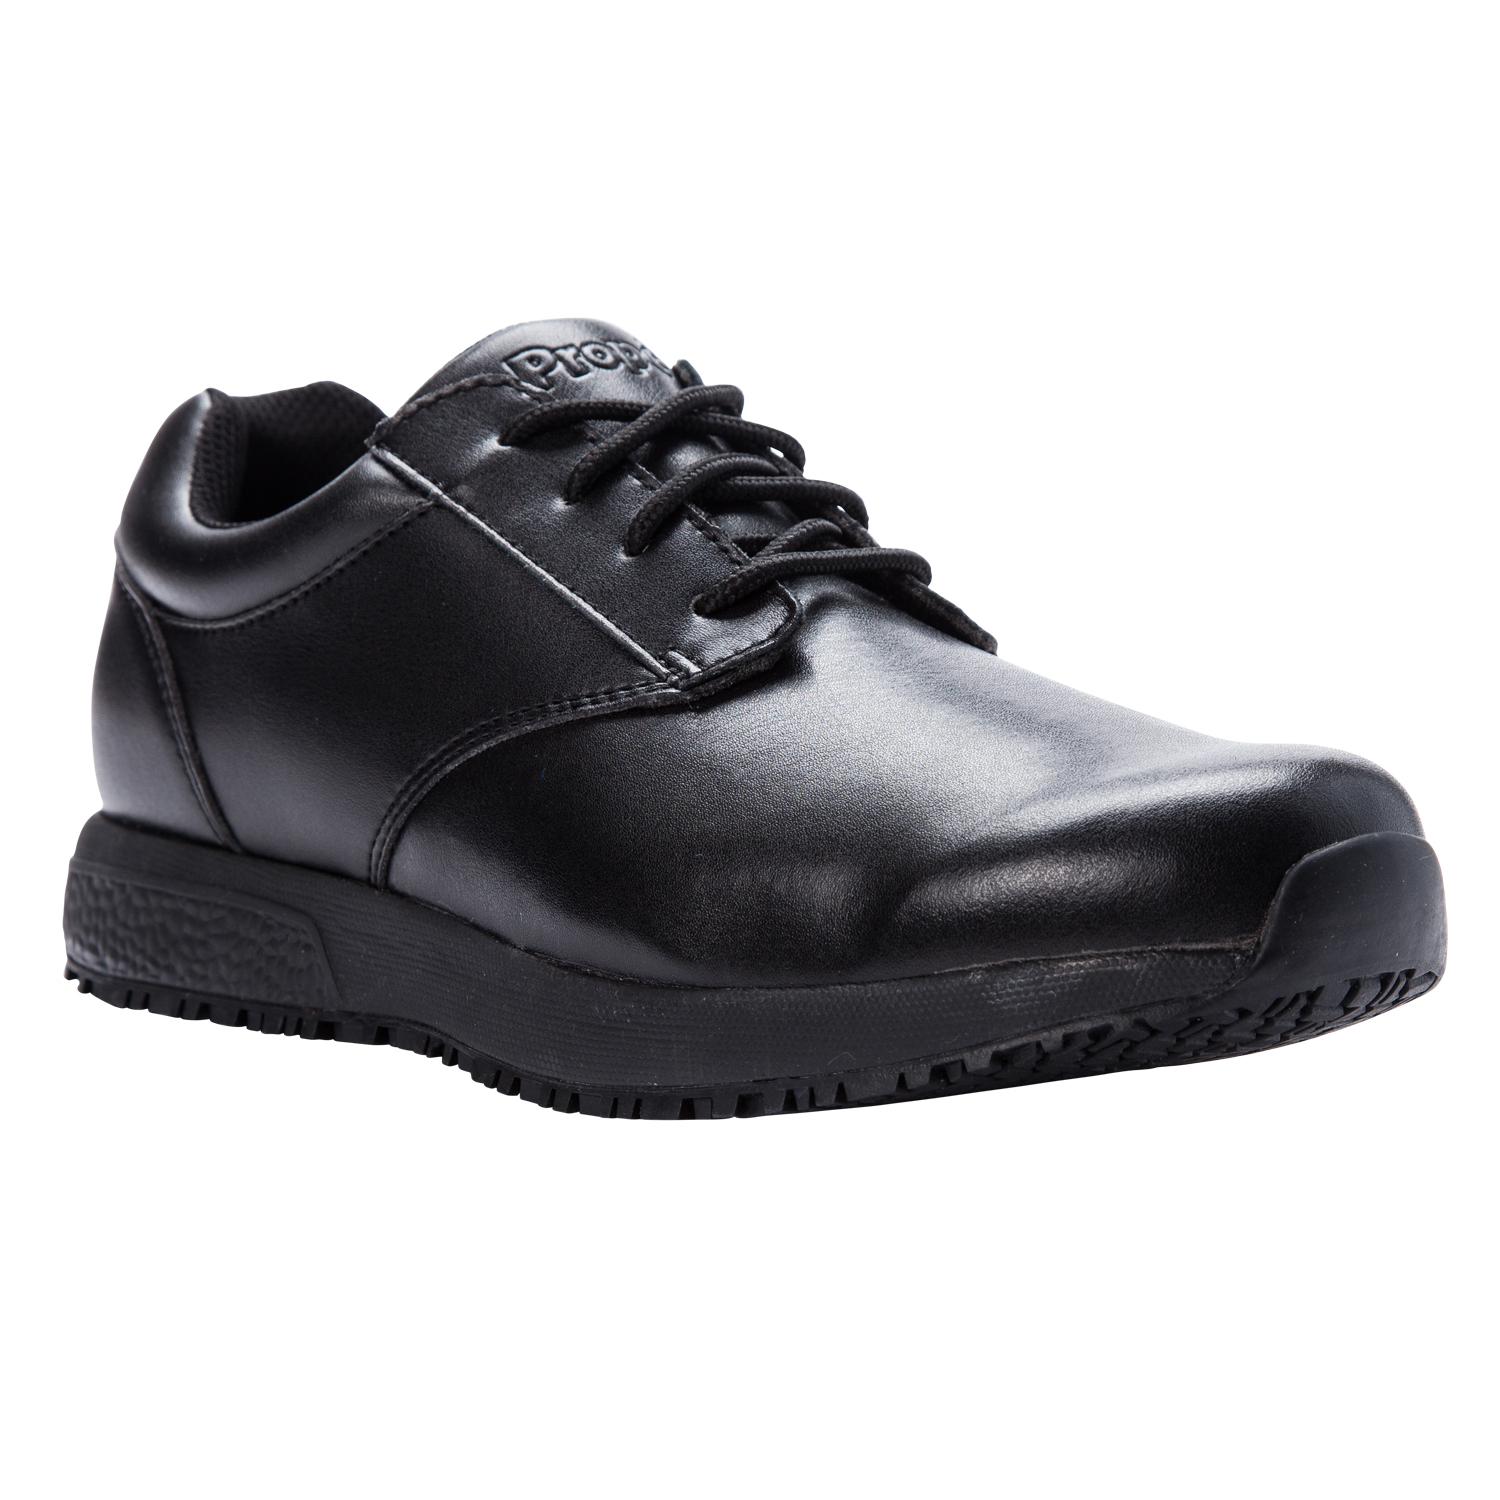 Propet Spencer Work Shoes with open Cell PU insole